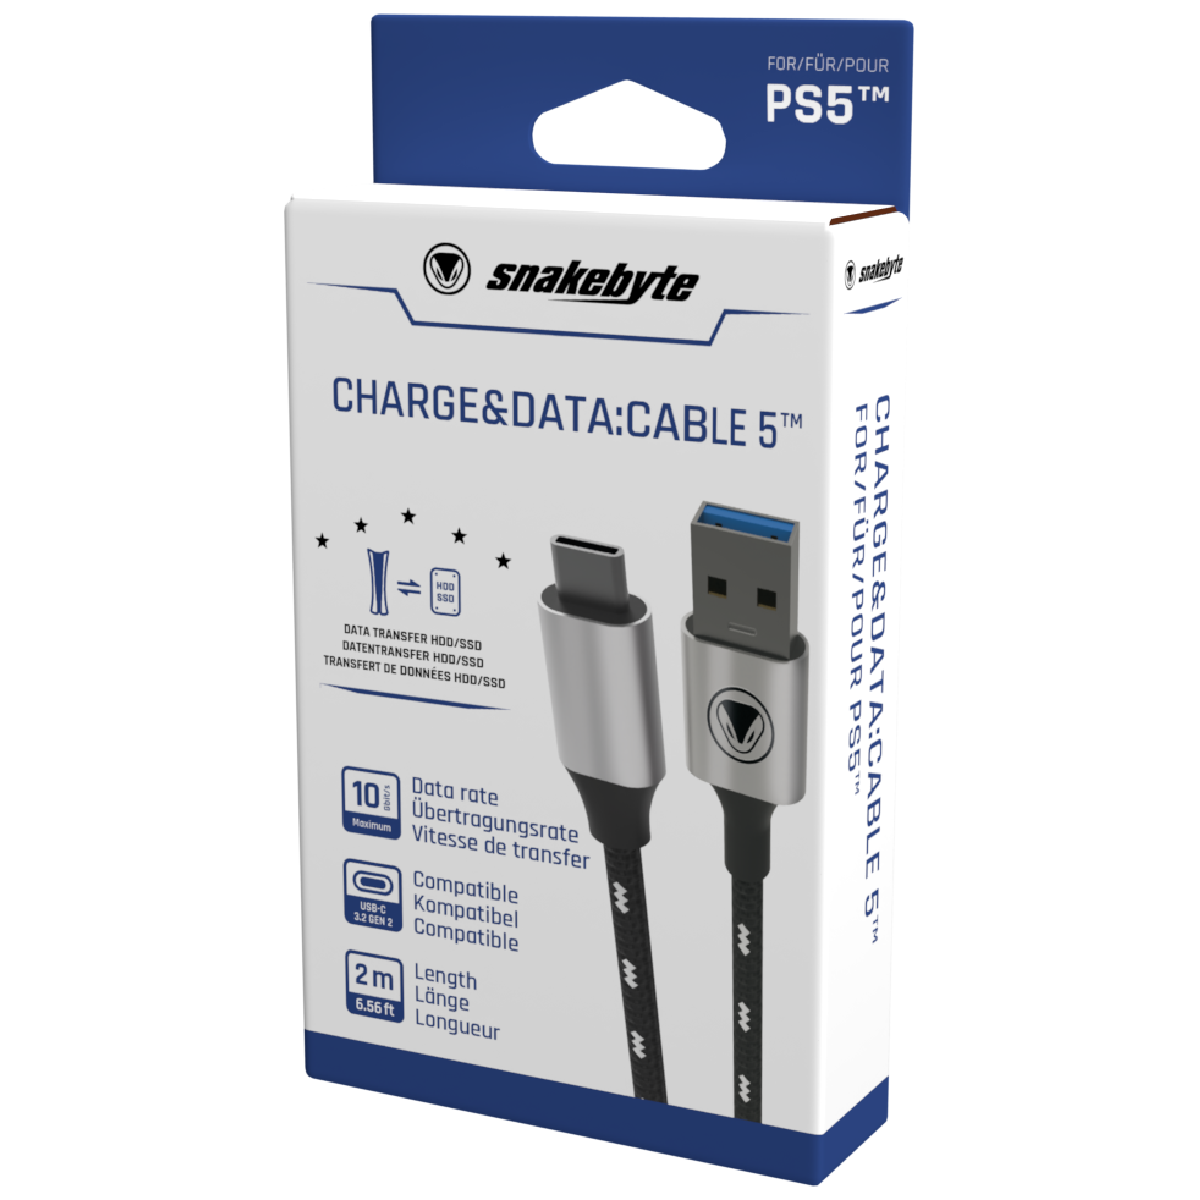 CHARGE&DATA:CABLE 5